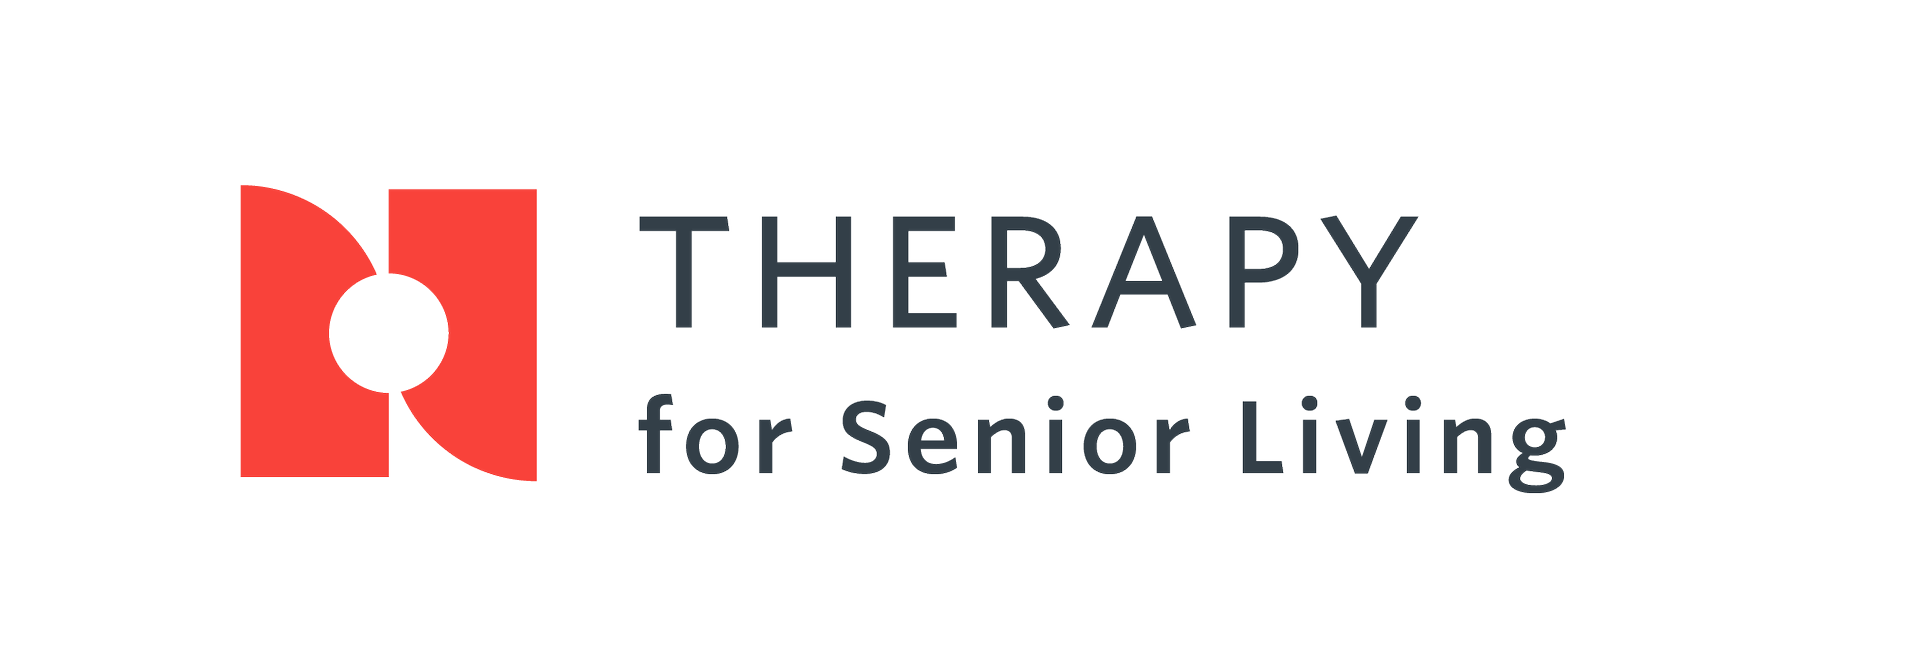 Net Health Therapy for Senior Living